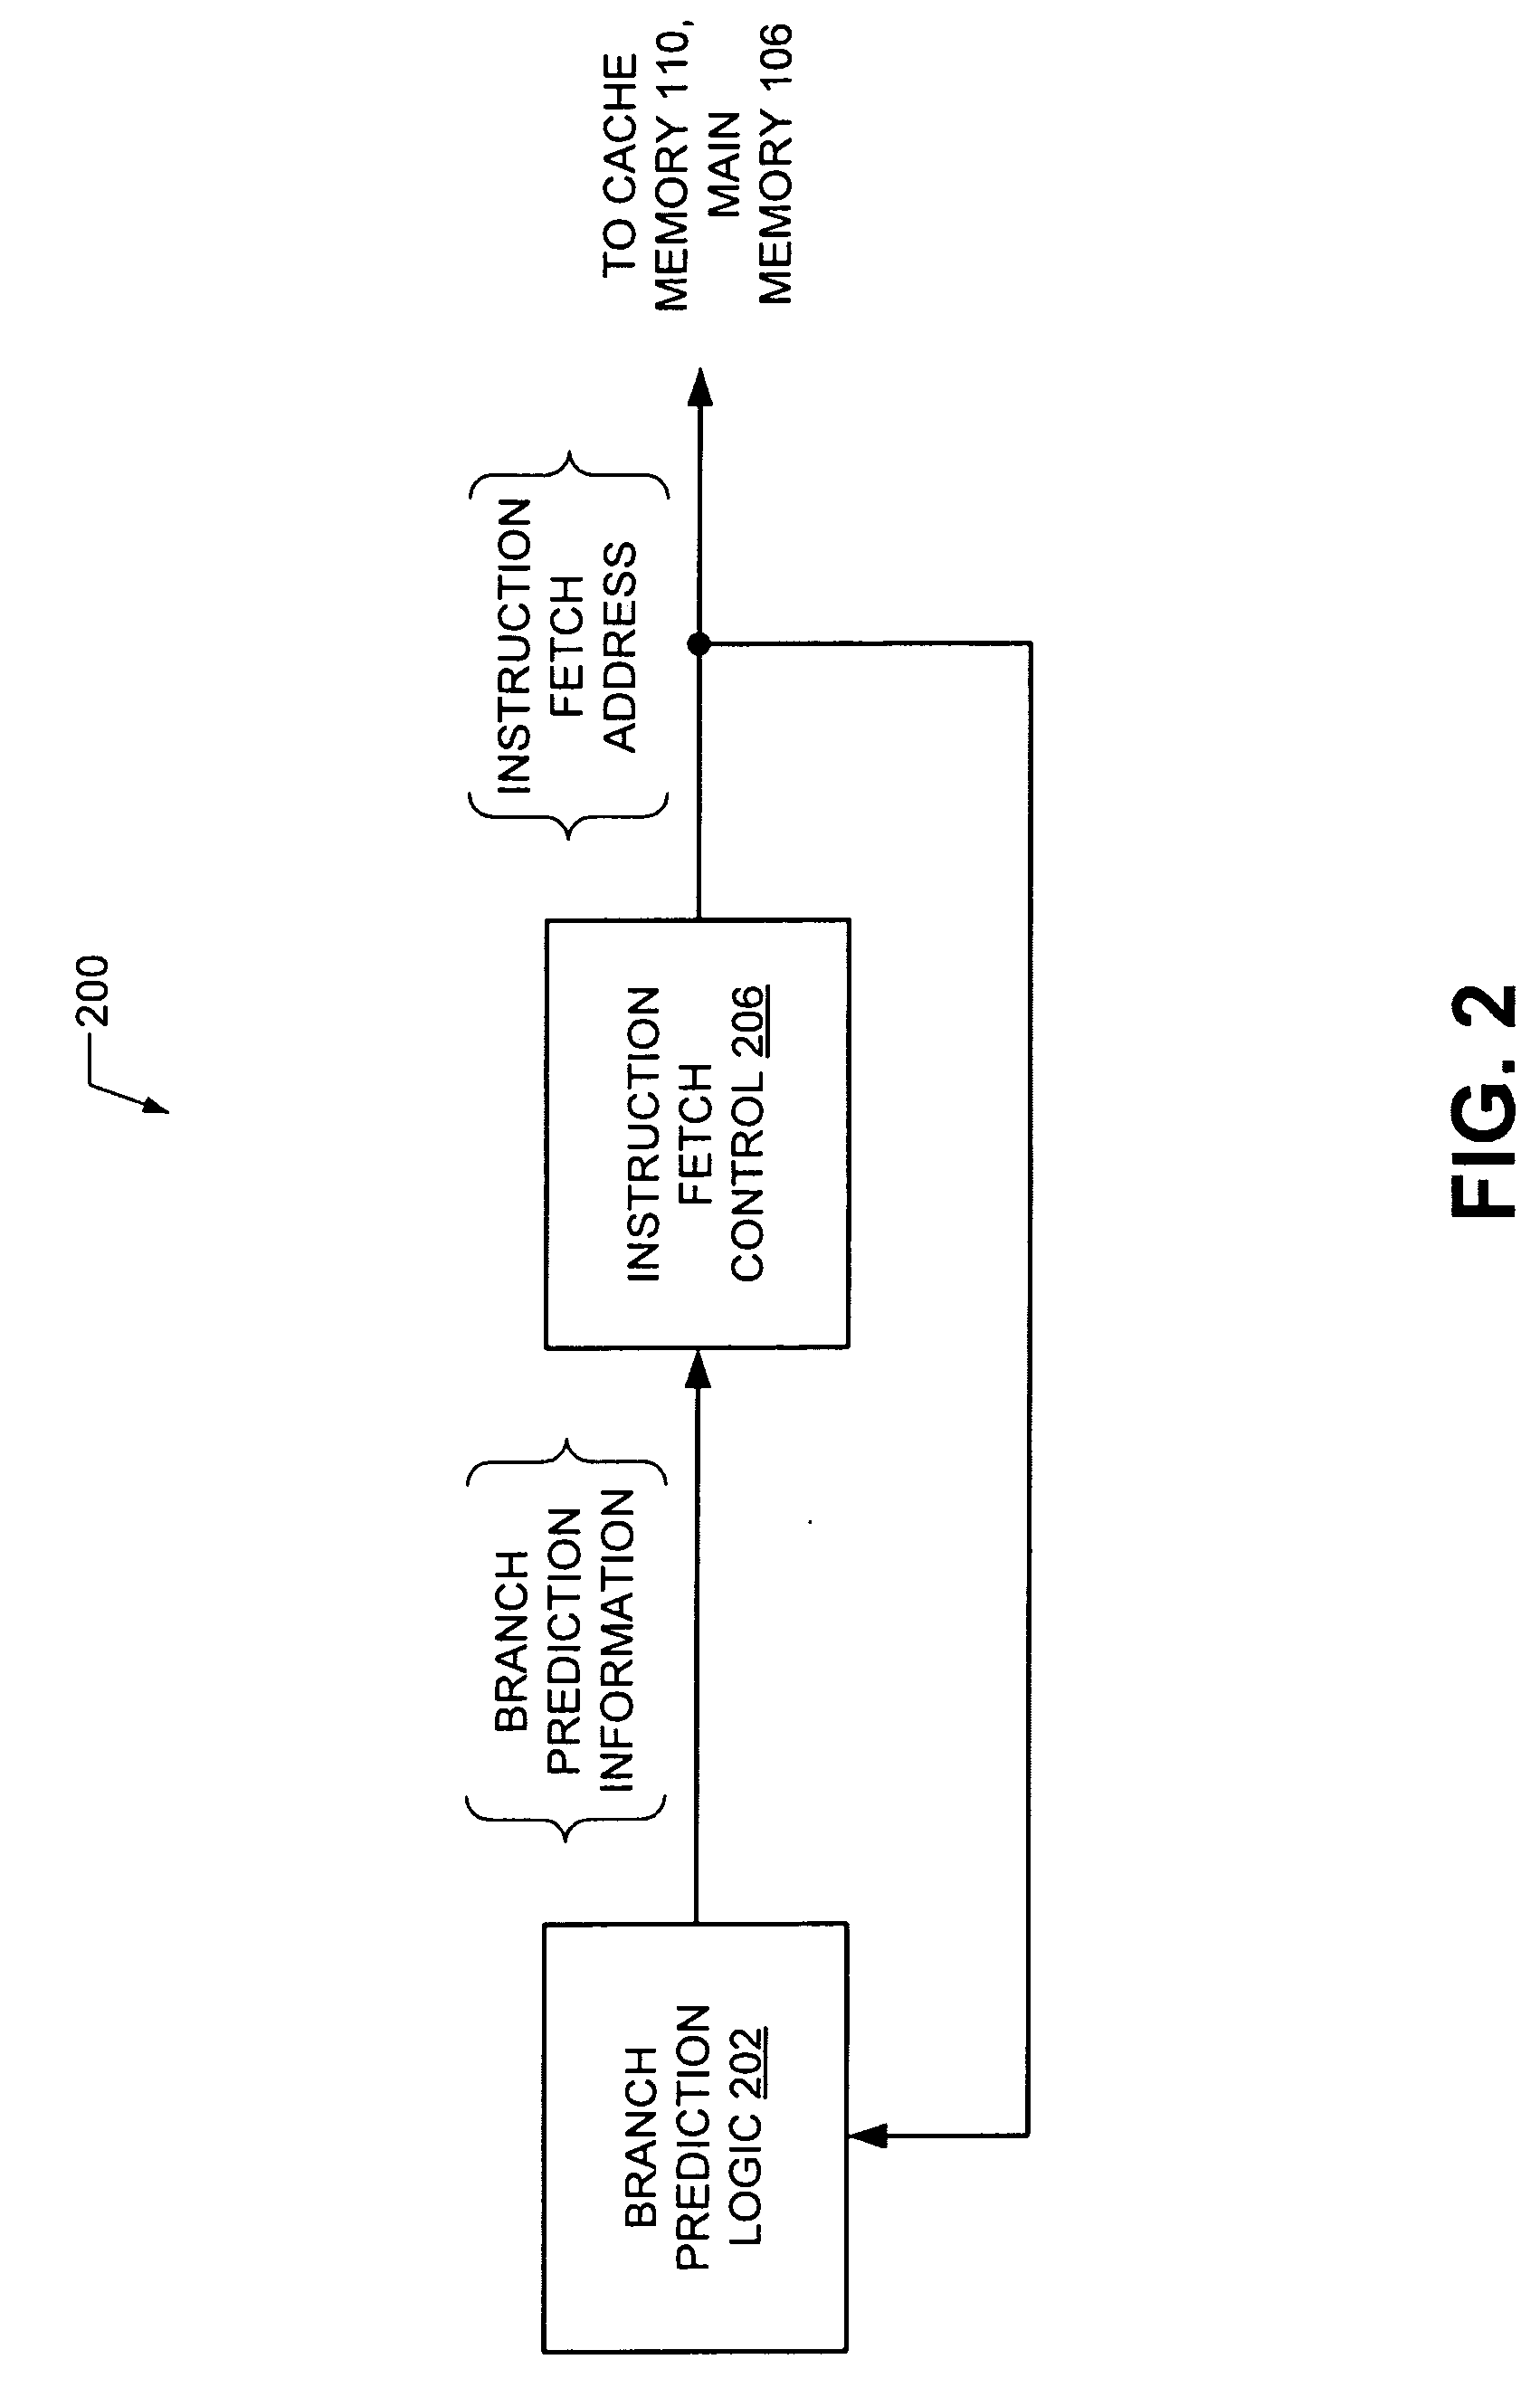 Method, system, and computer program product for reducing cache memory pollution